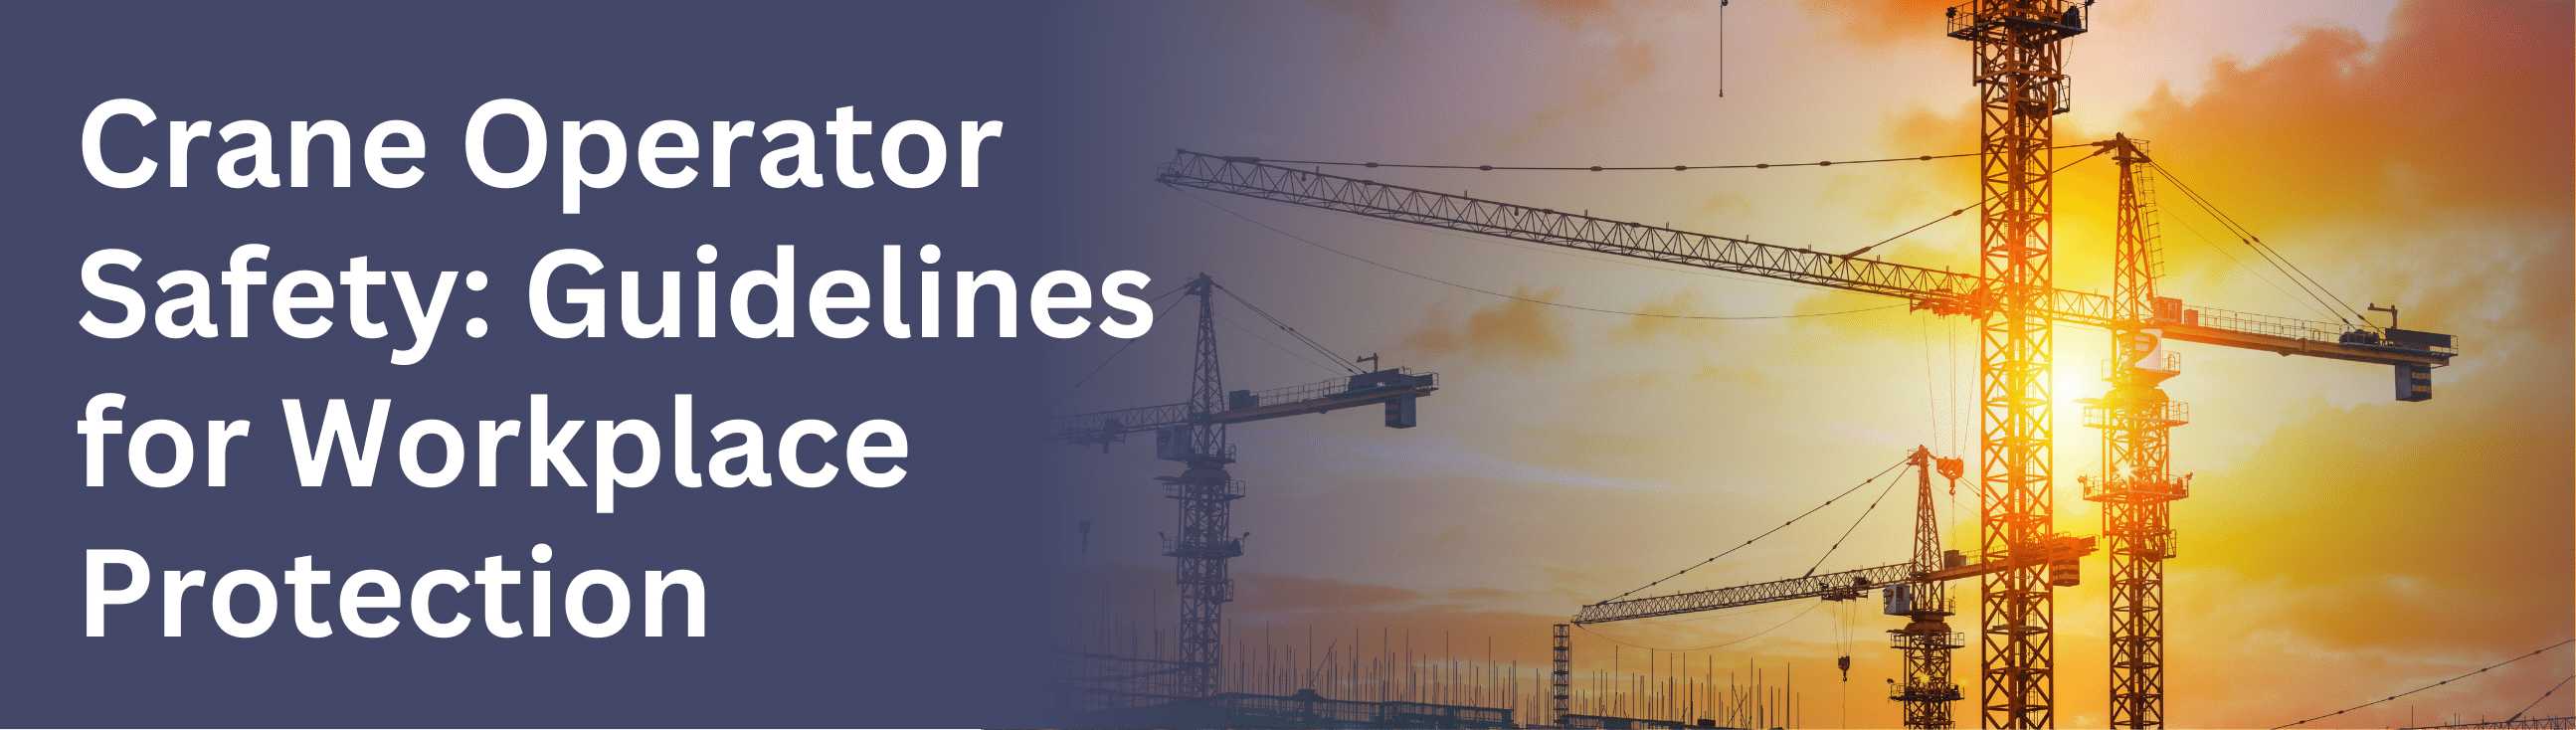 Crane Operator Safety: Guidelines for Workplace Protection